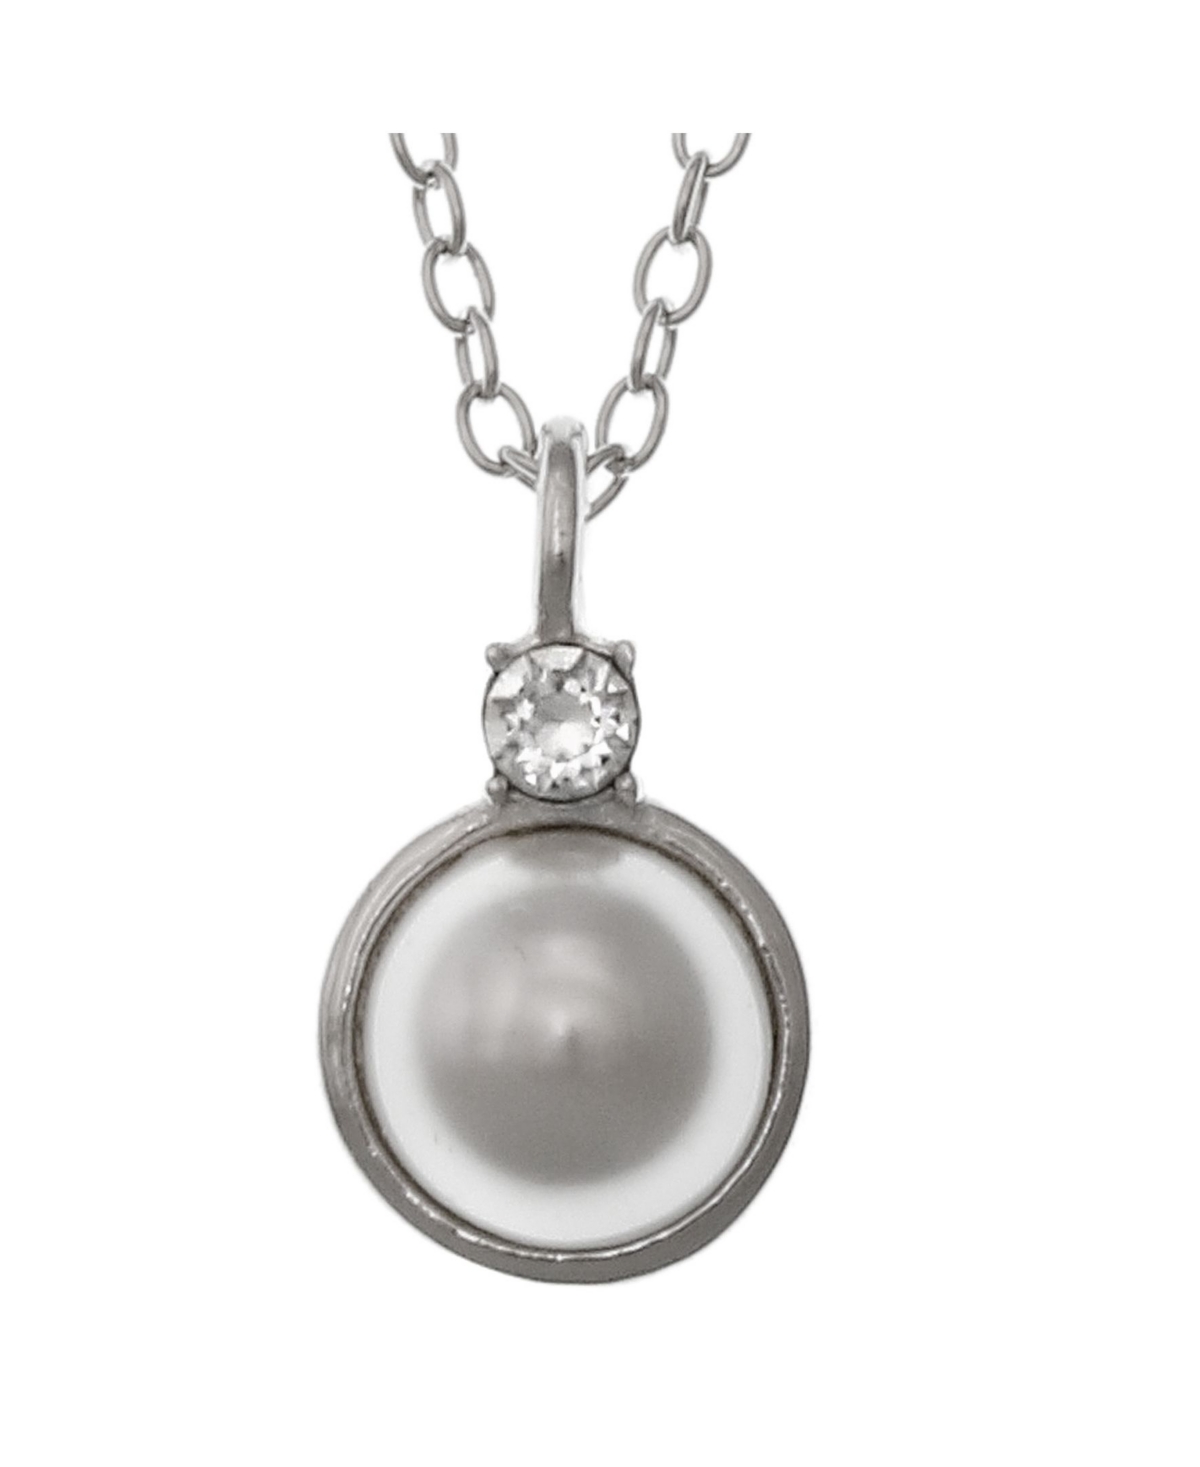 Fao Schwarz Women's Sterling Silver Imitation Pearl and Crystal Stone Pendant Necklace